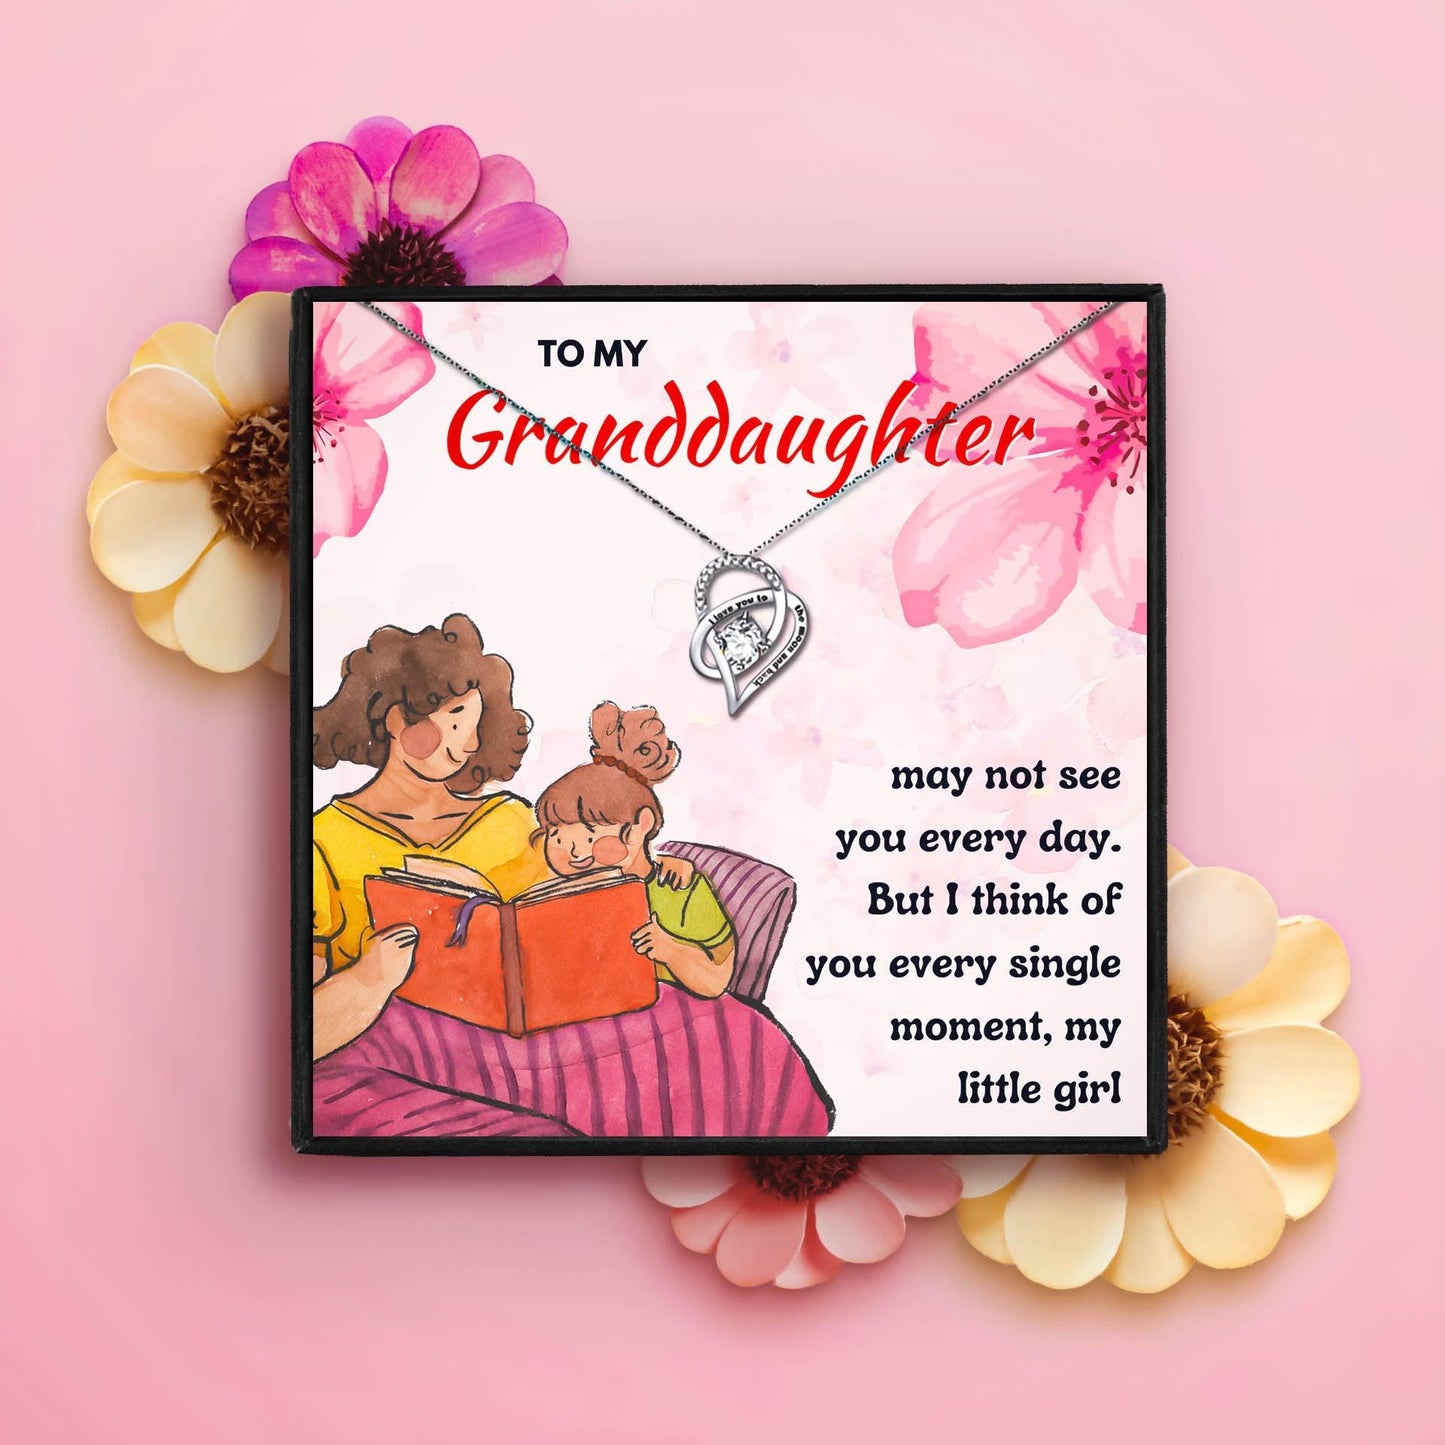 Special Gifts For Granddaughters From Grandma for Christmas 2023 | Special Gifts For Granddaughters From Grandma - undefined | gifts for teenage granddaughter, graduation gifts for granddaughter, granddaughter necklace from grandma, special gifts for granddaughters, unique granddaughter gifts | From Hunny Life | hunnylife.com